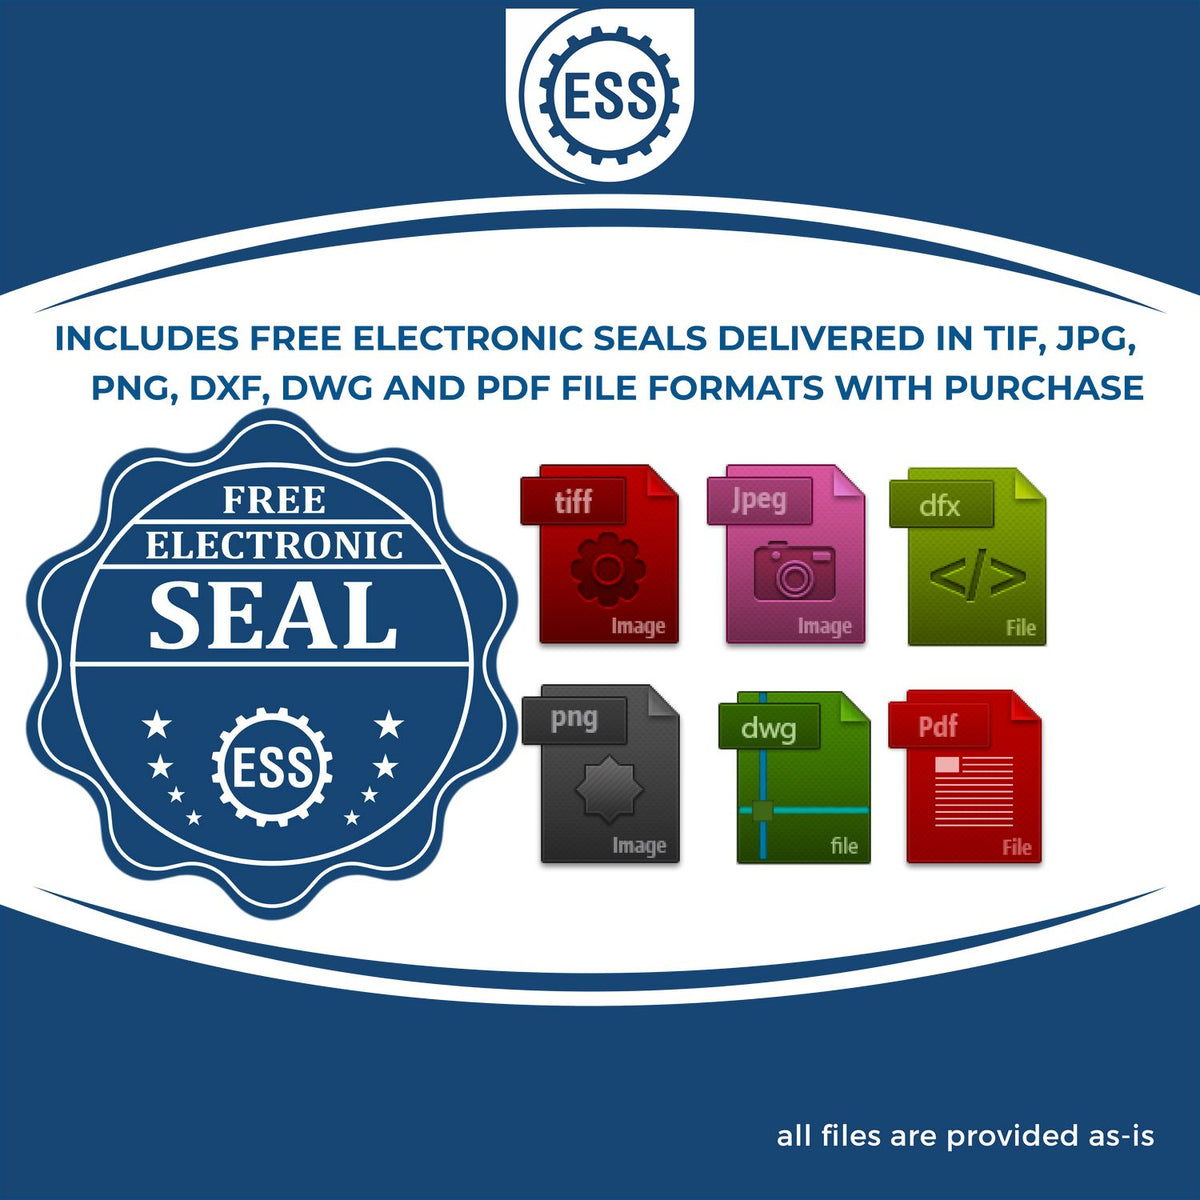 An infographic for the free electronic seal for the Gift Louisiana Architect Seal illustrating the different file type icons such as DXF, DWG, TIF, JPG and PNG.